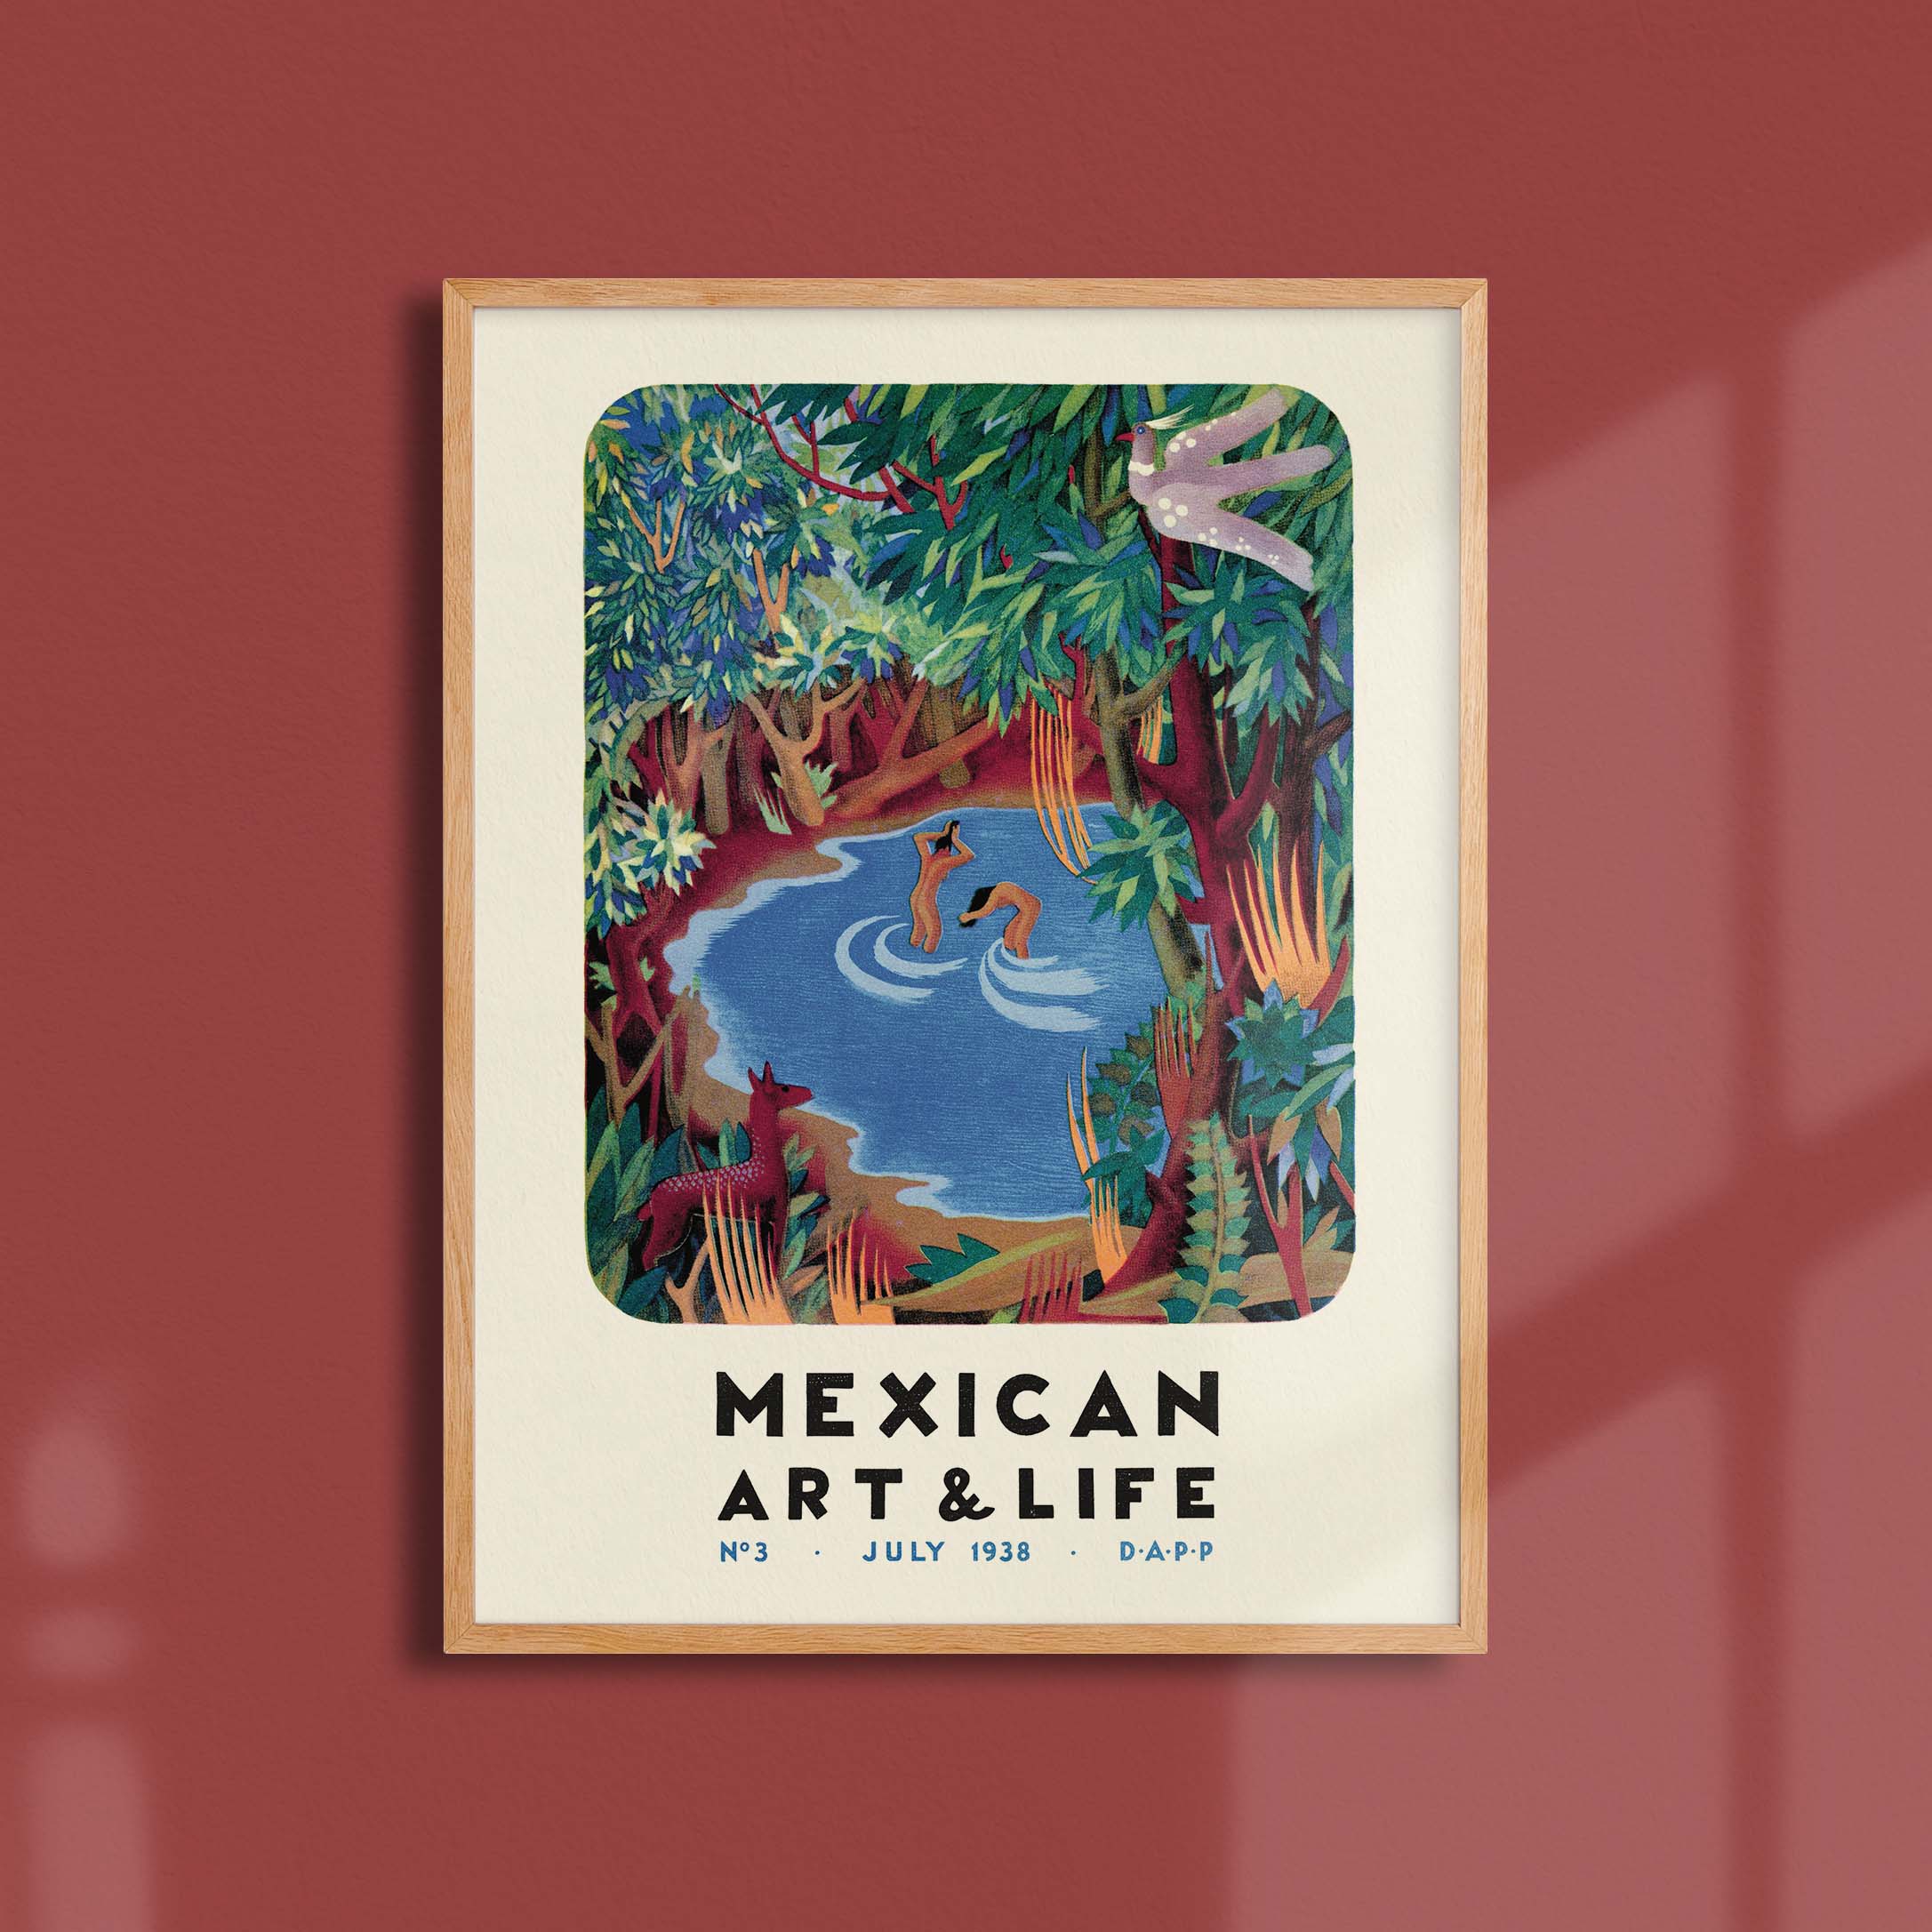 Affiche Mexican Art & Life - N° 3-oneart.fr